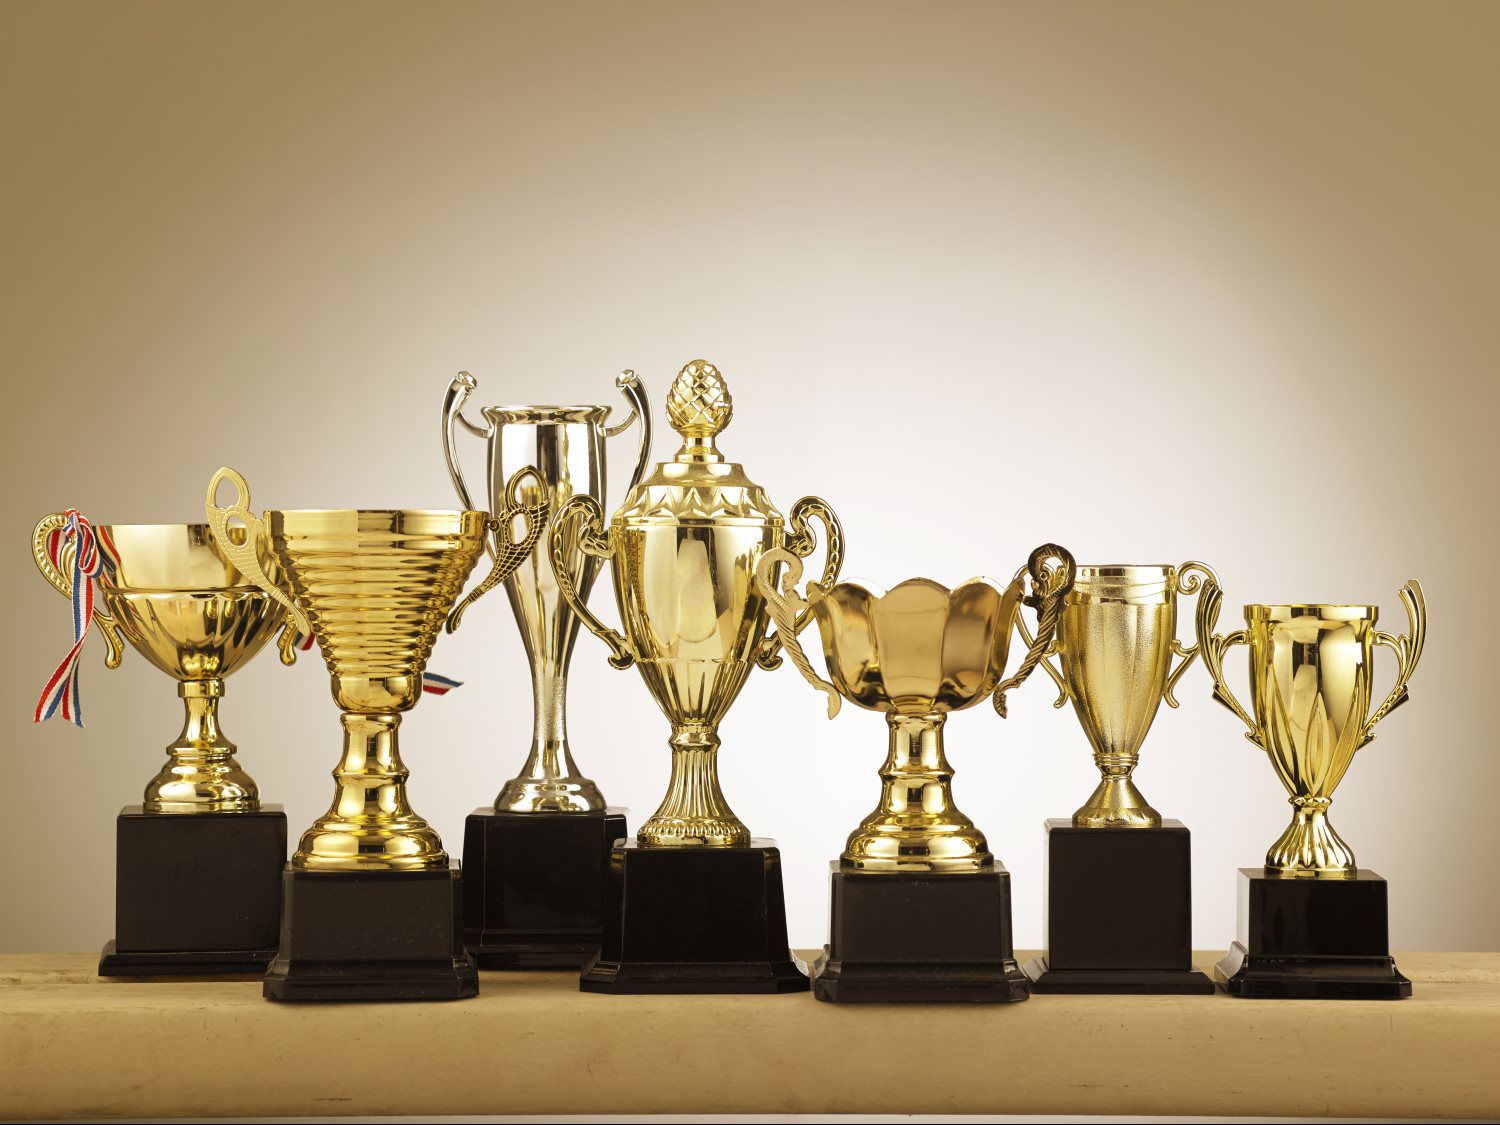 Significant Guidelines To Crystal Awards And Trophies For 2021!